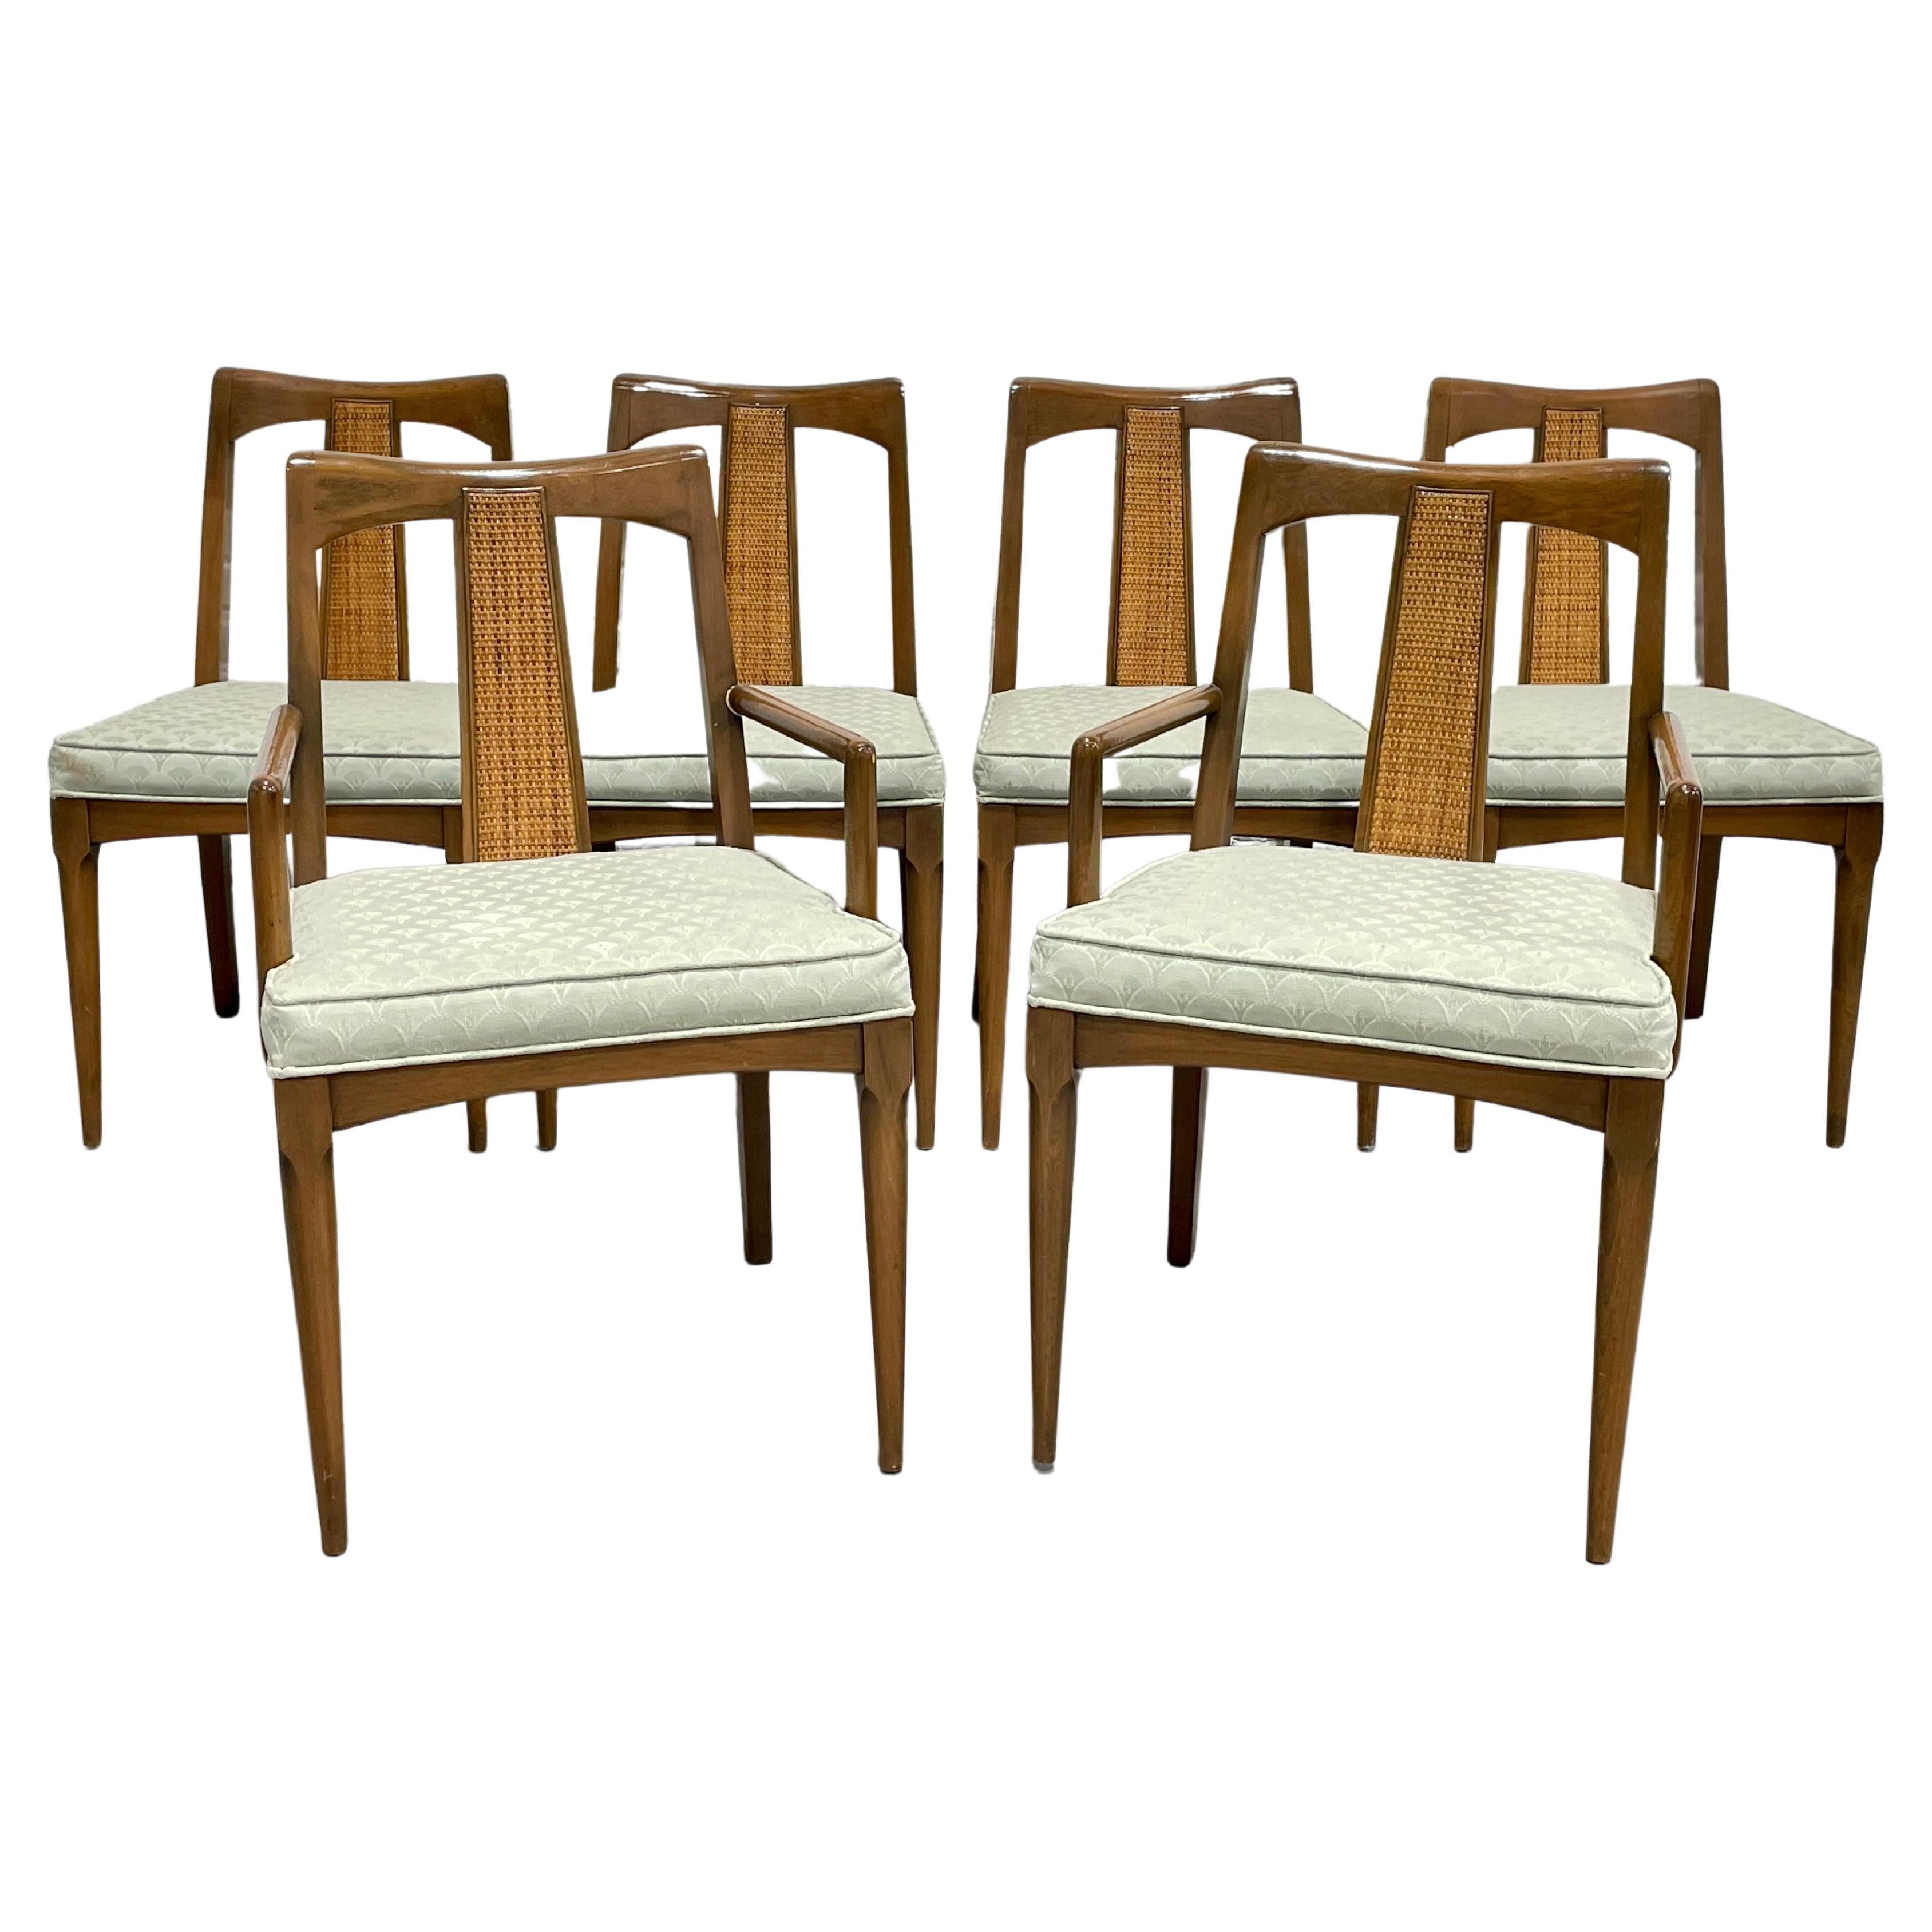 Mid-Century Modern Walnut Caned Dining Chairs, Set of 6 For Sale